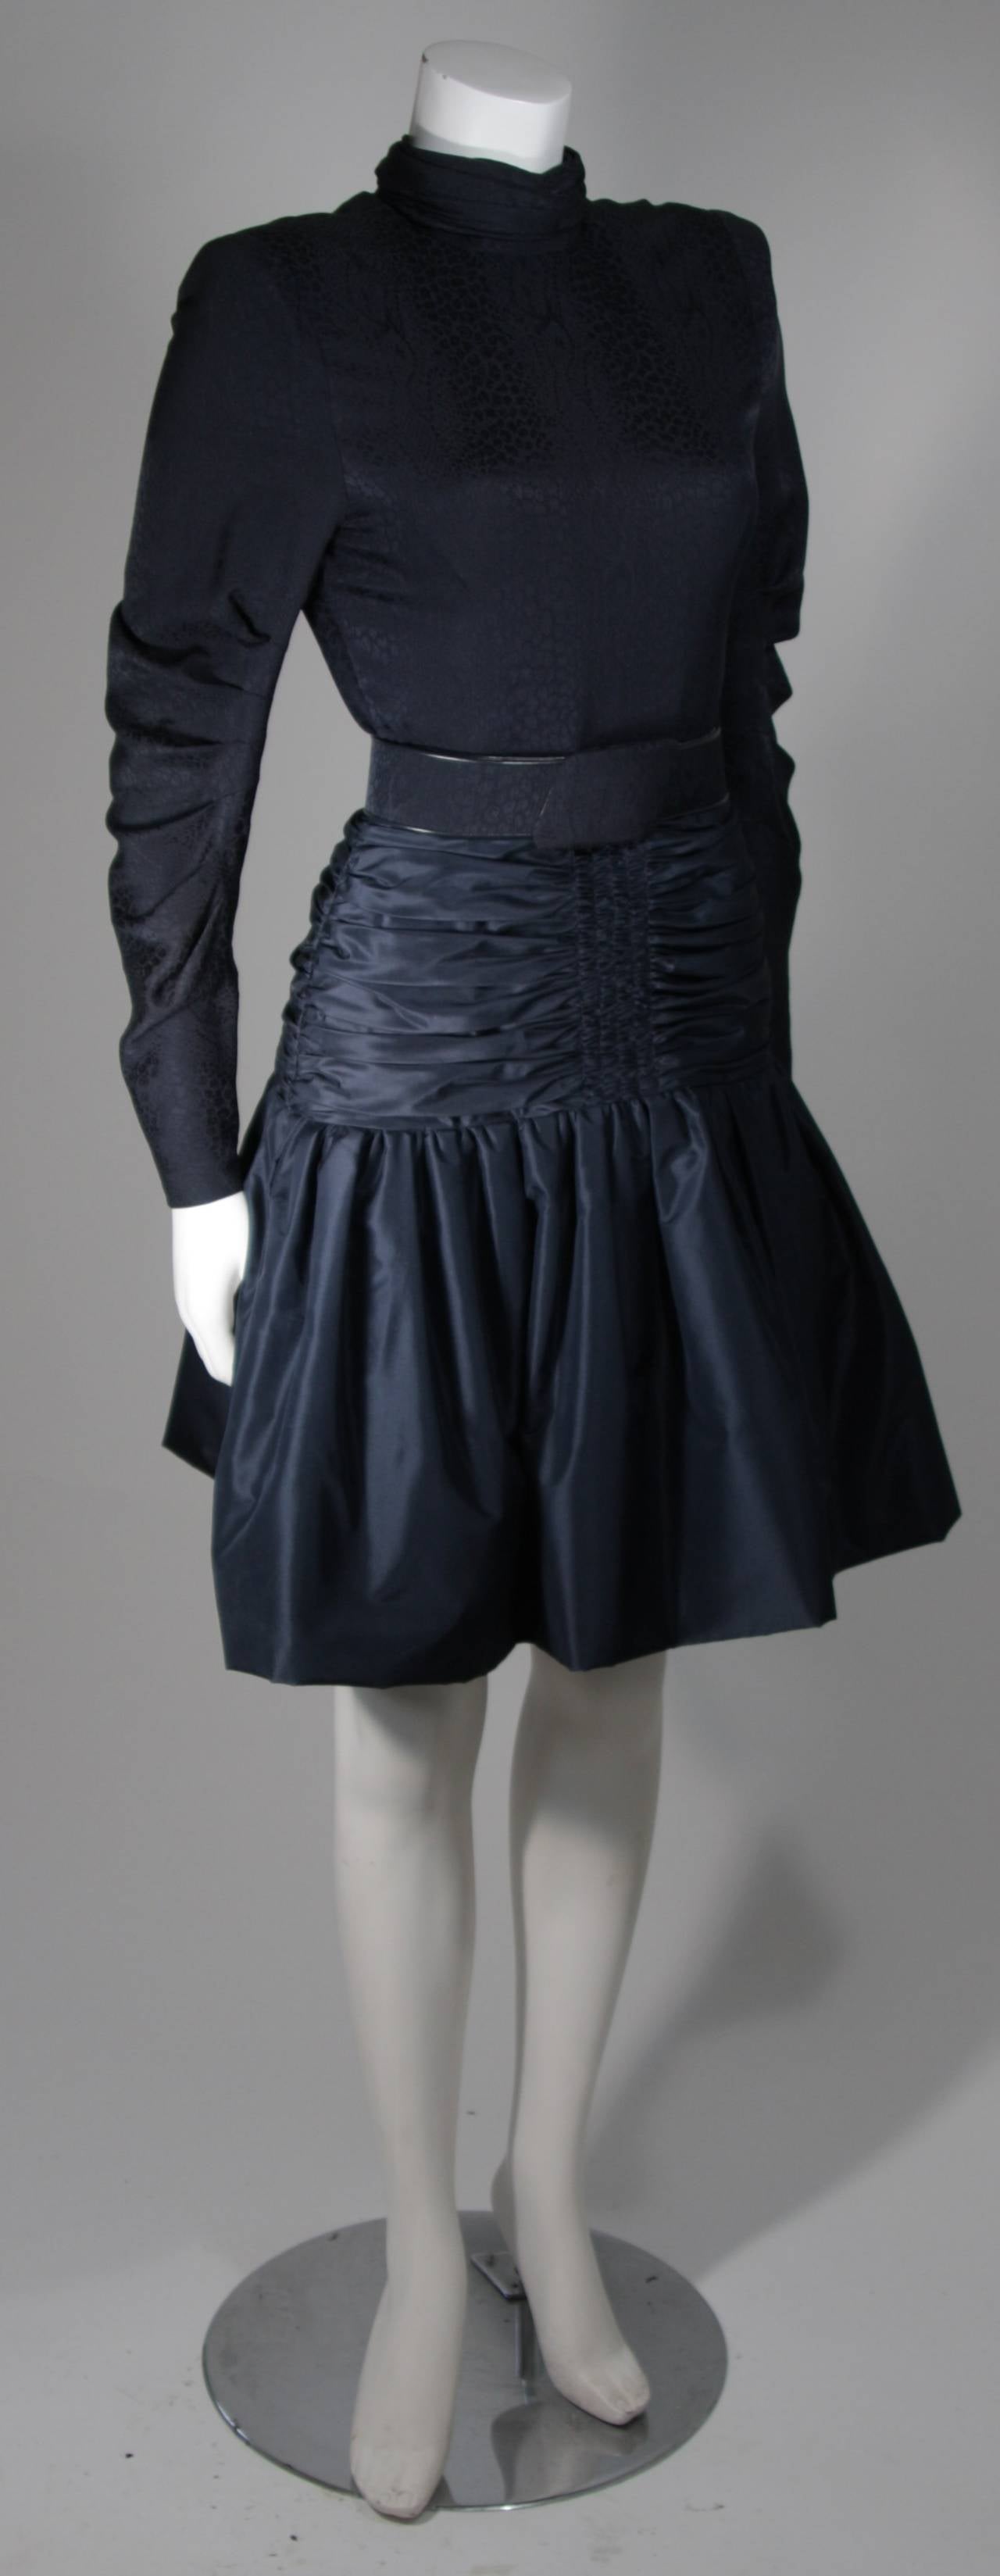 Women's Galanos Couture Navy Silk Cocktail Dress with Gathers and Belt Size 2 4